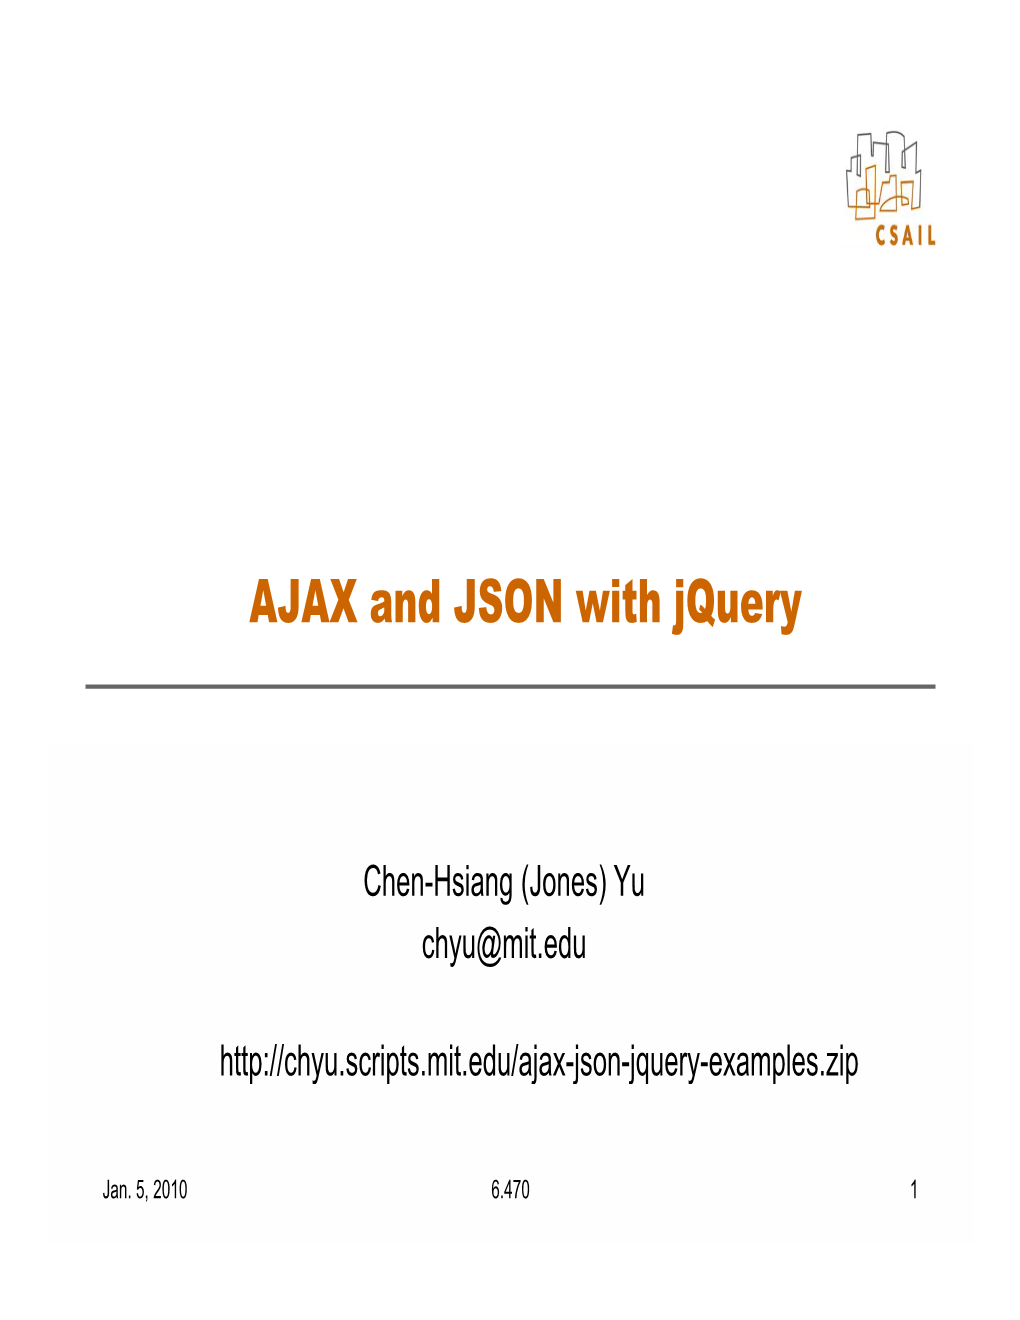 AJAX and JSON with Jquery